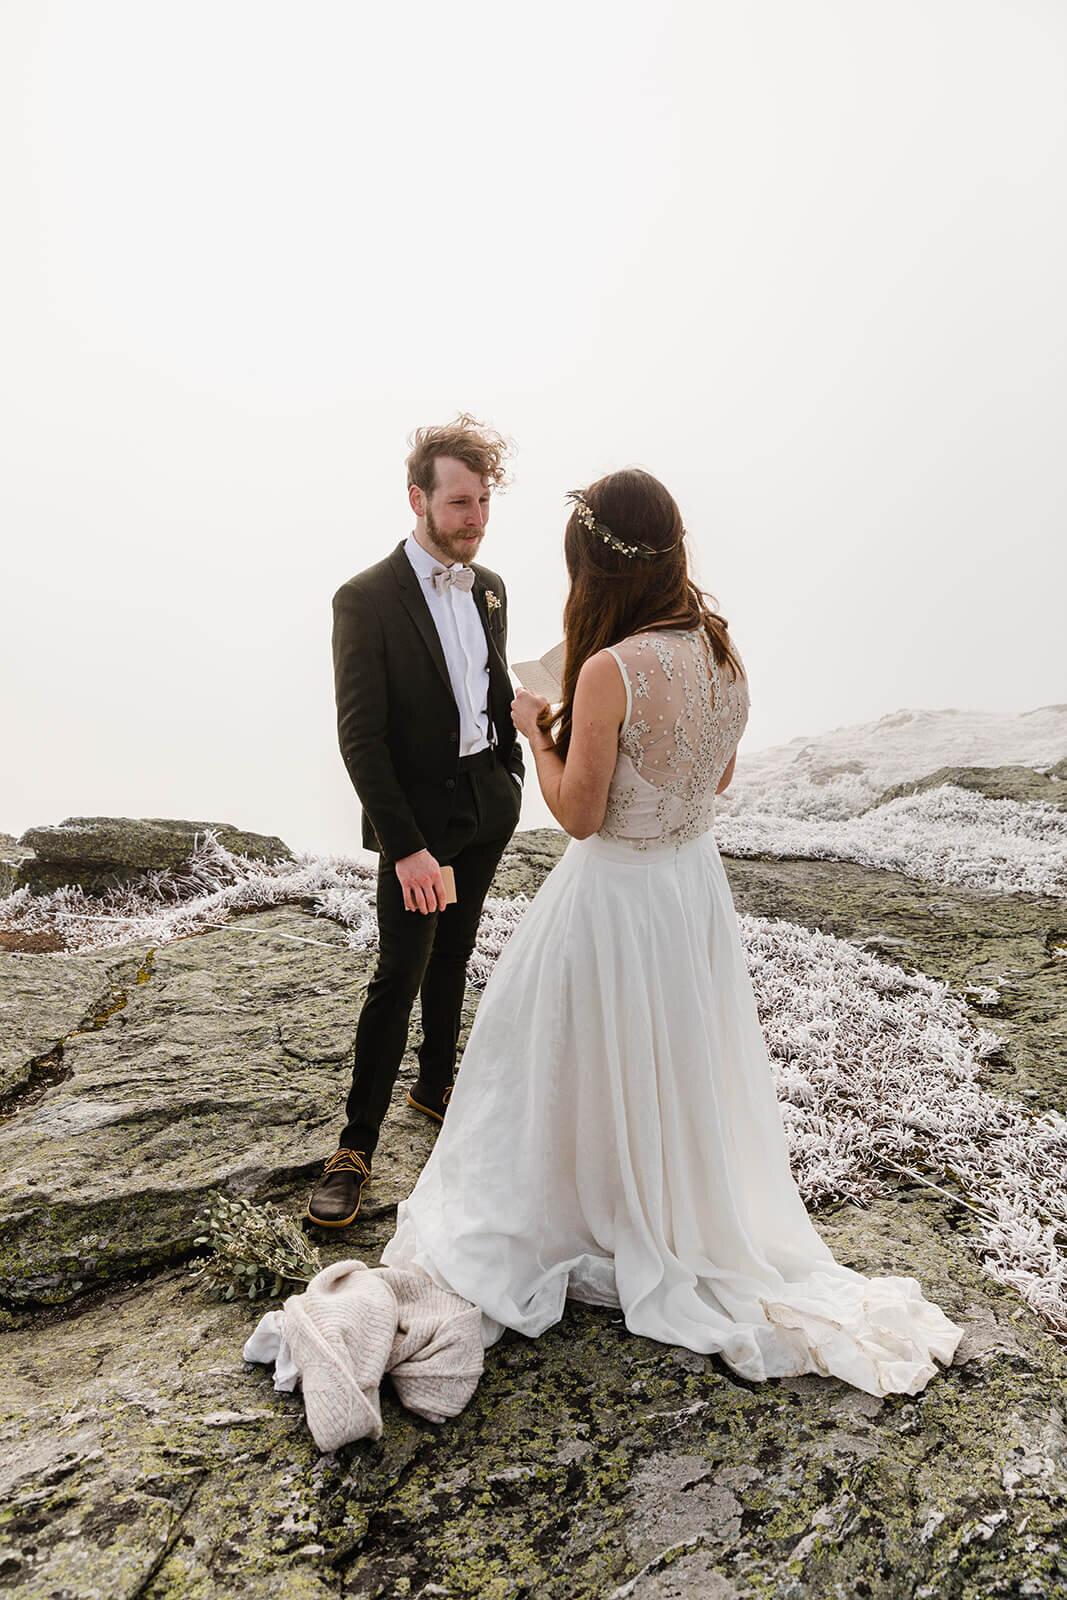  Eloping couple has ceremony in frosty conditions during their adventure elopement on Mt. Mansfield, Vermont’s tallest mountain.  Vermont mountain wedding. Vermont winter elopement. Vermont elopement packages. 